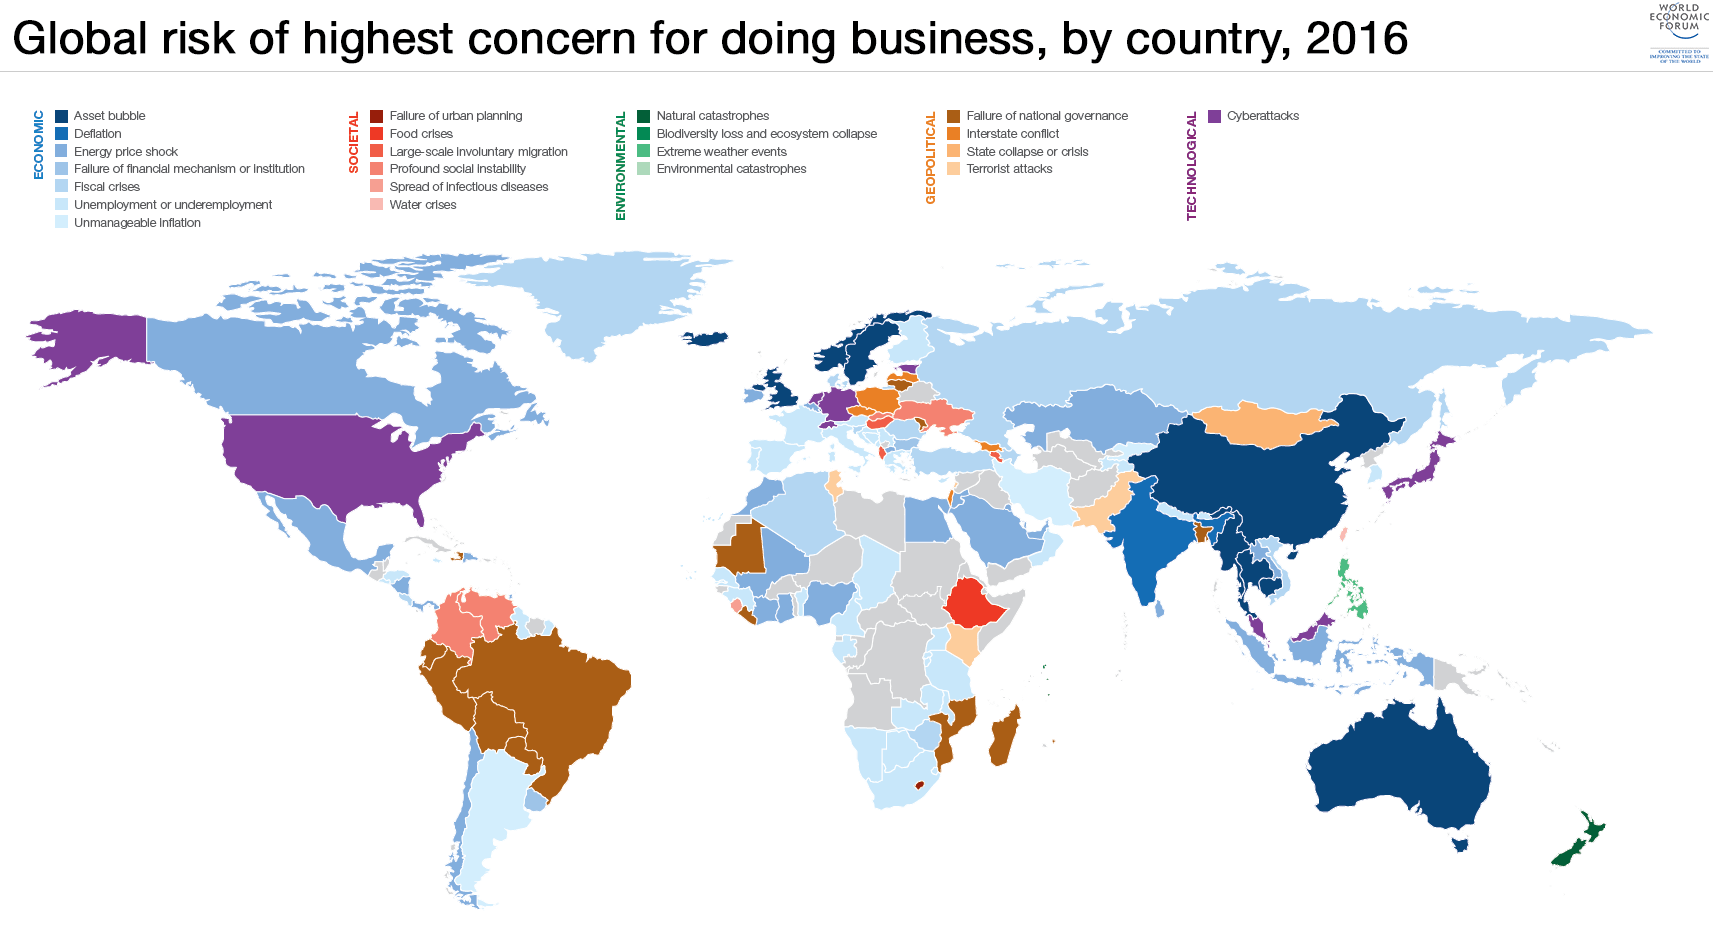 Top Global Geopolitical Risk Concerns, by Counrtry, 2016 